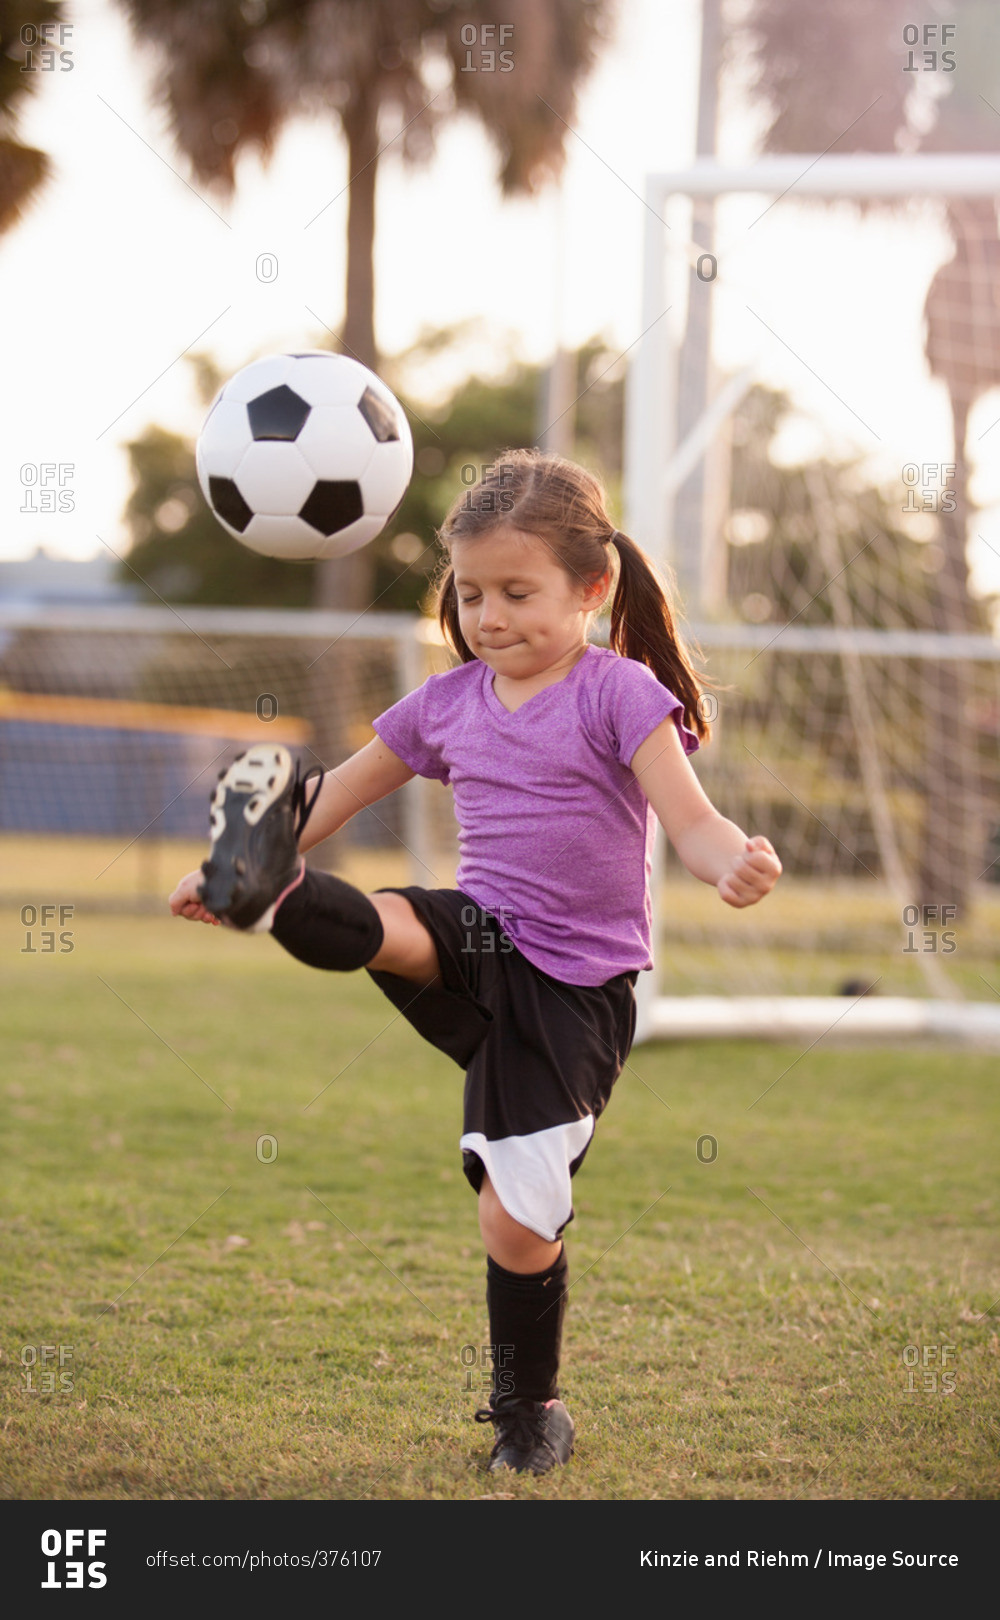 Girl kicking football on practice pitch